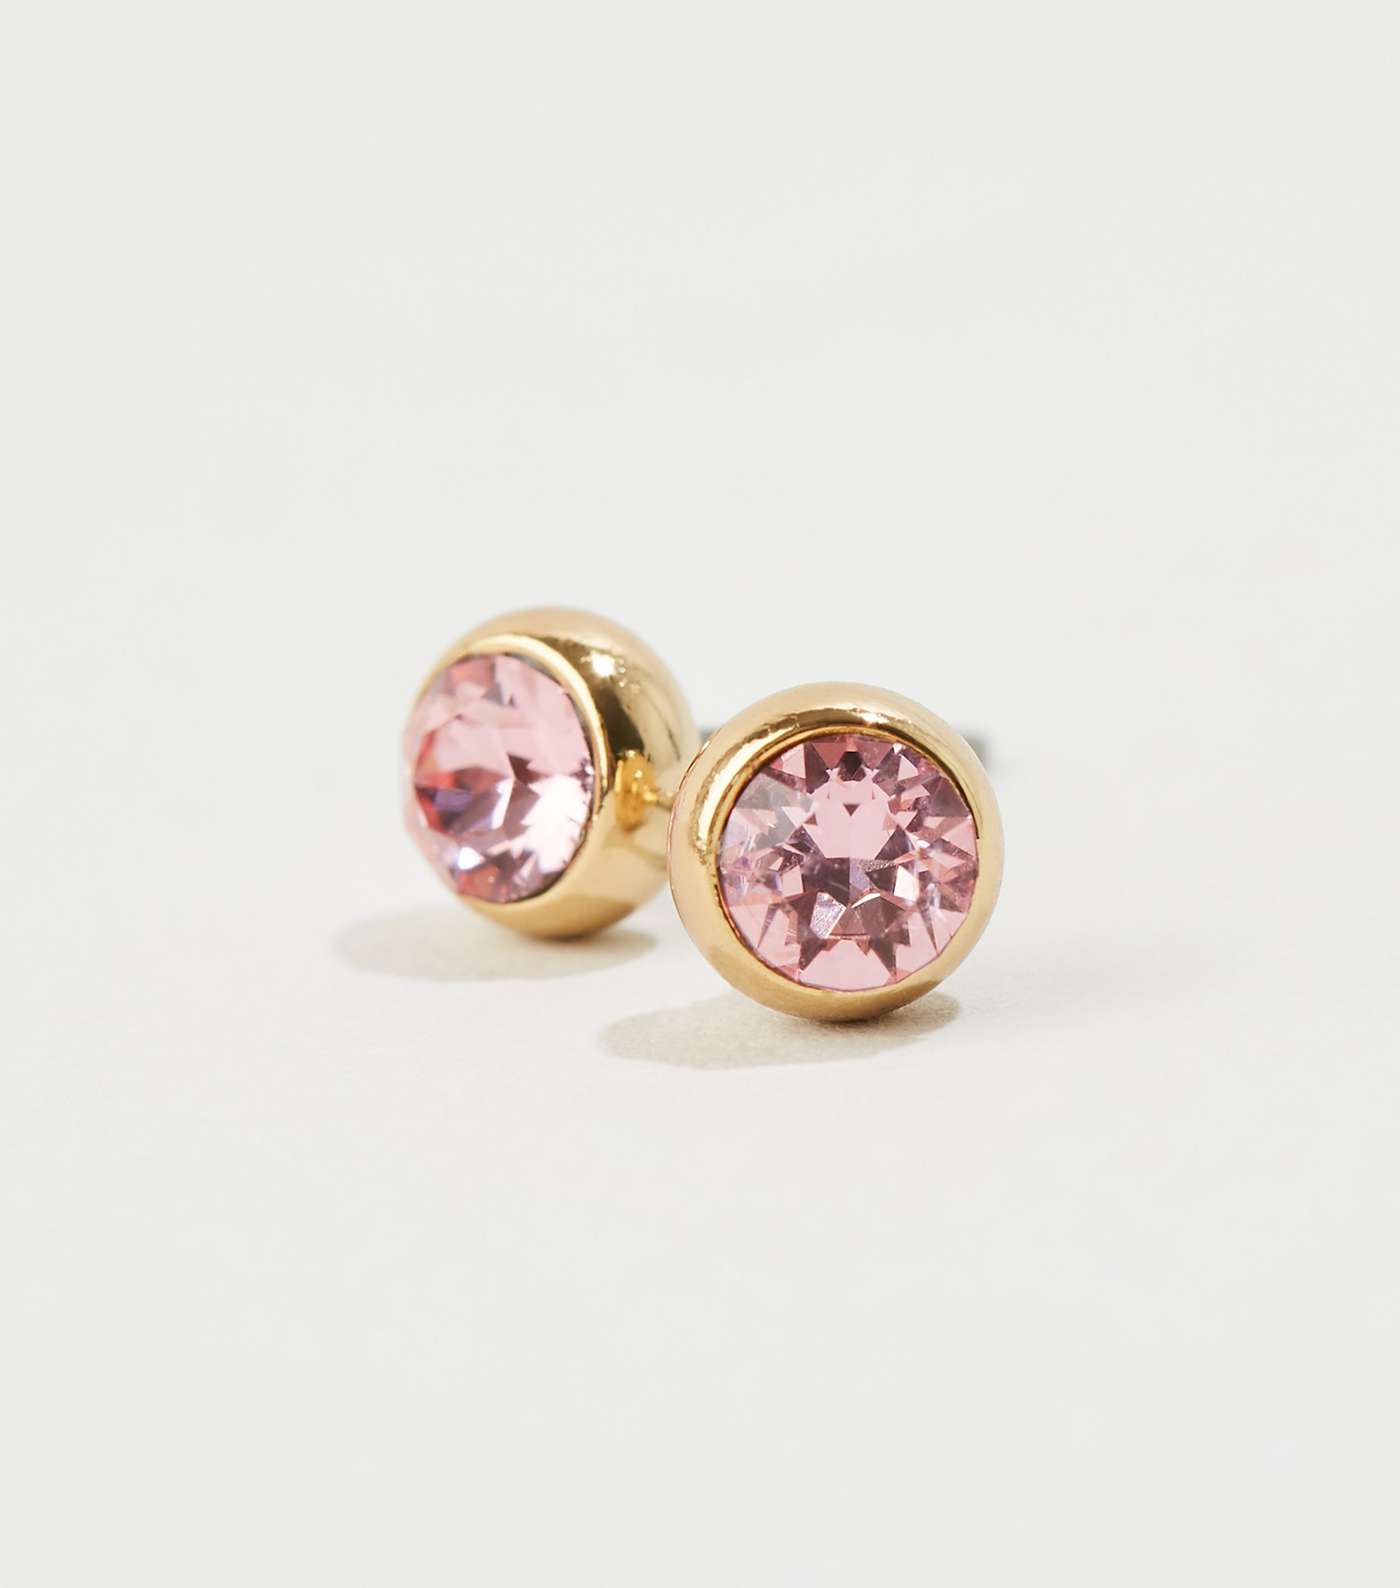 Gold Plated Stud Earrings with Crystals from Swarovski® Image 3